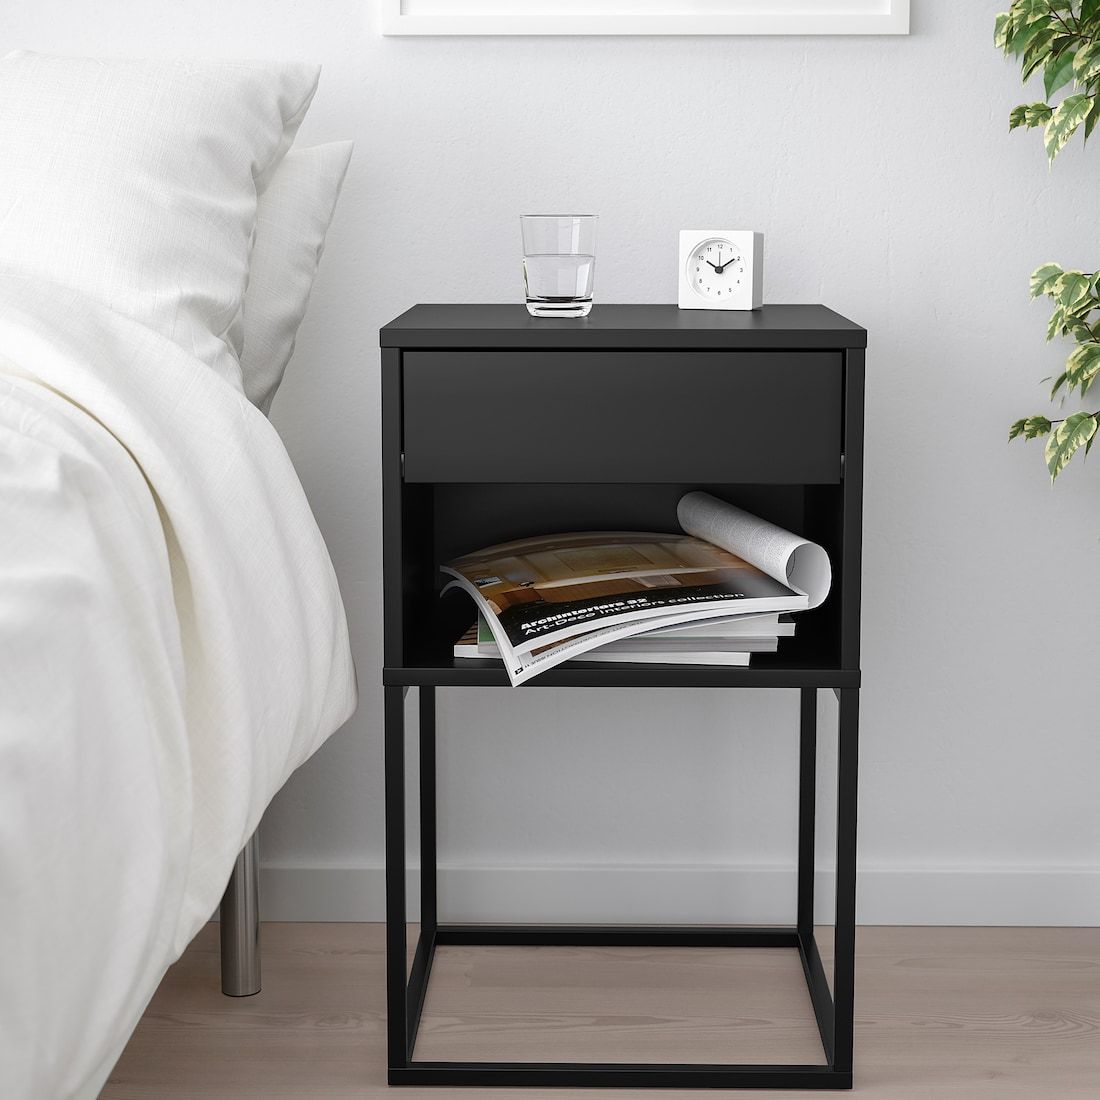 Timeless Elegance: The Beauty of Black and White Bedside Tables